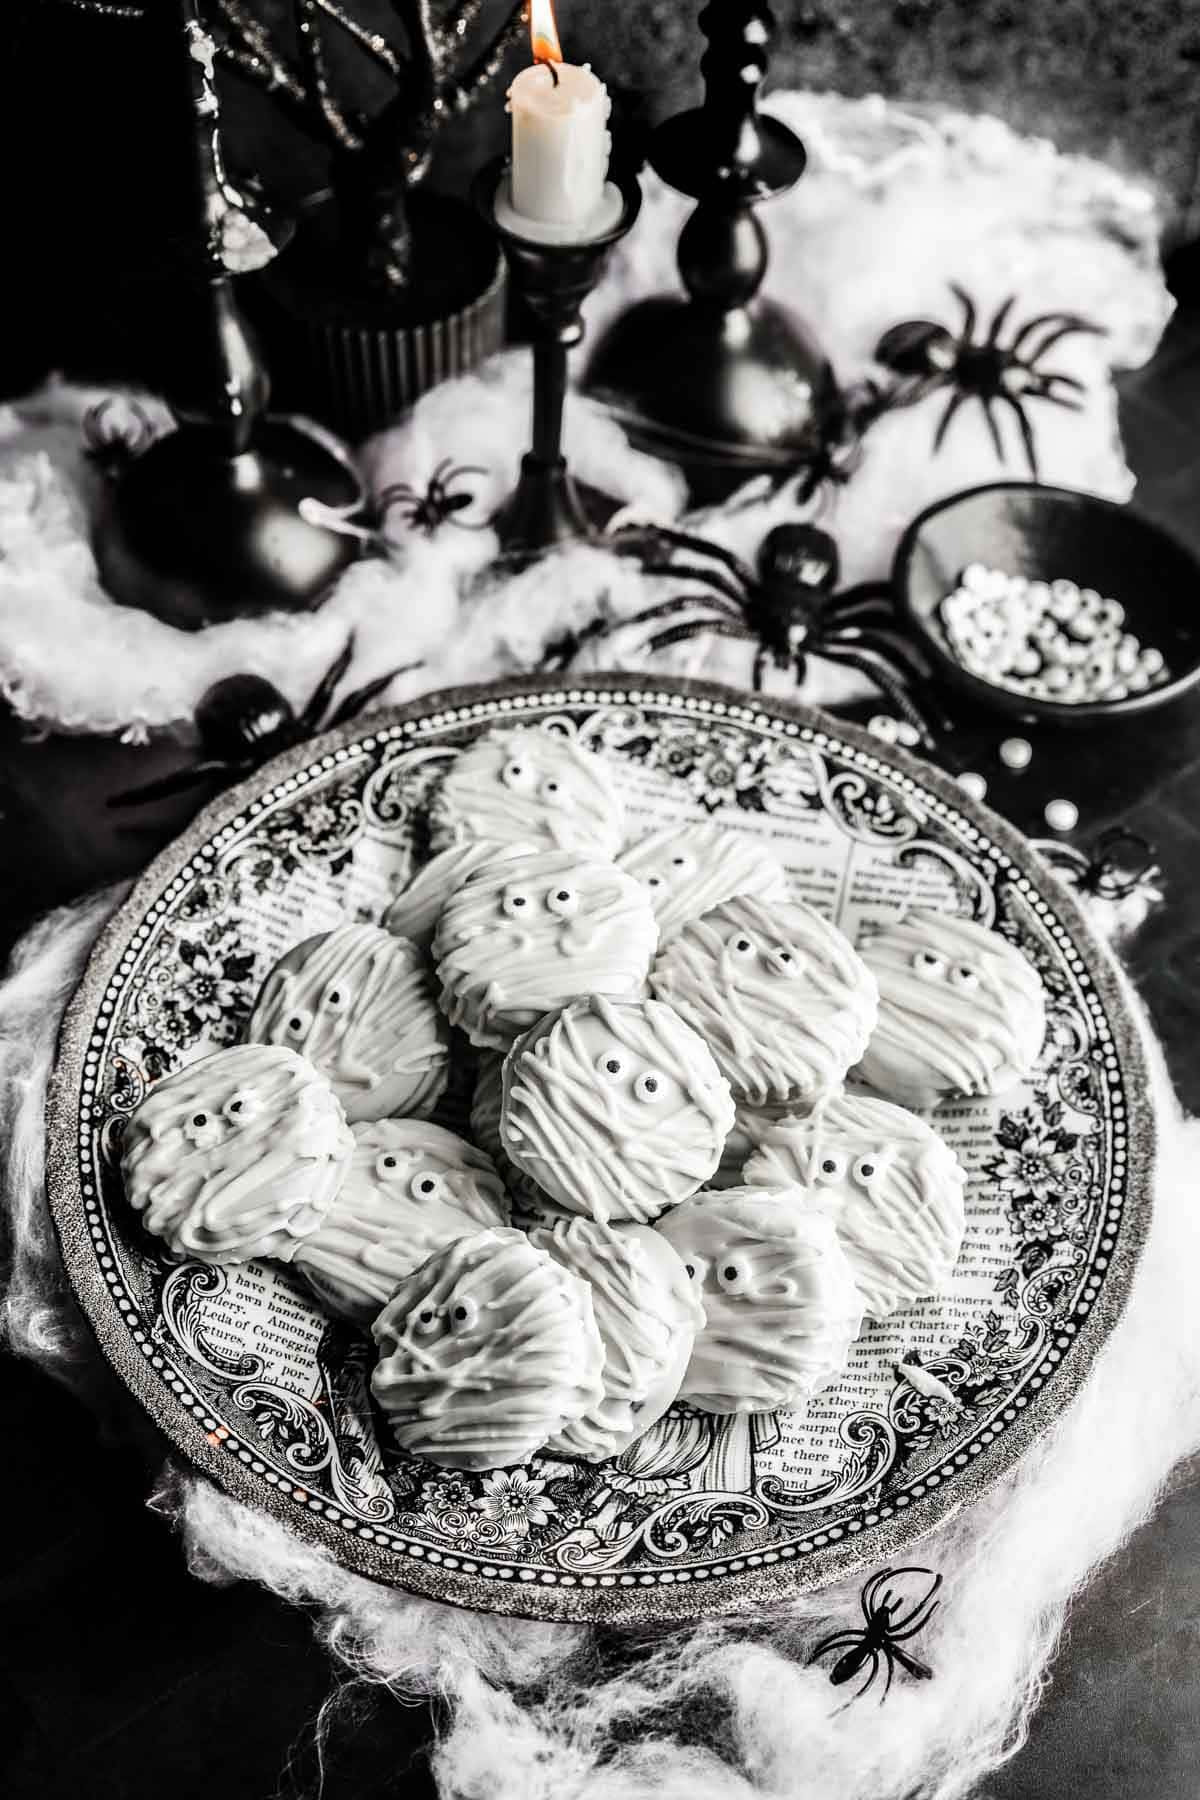 the cookies on a plate with spider webs and black candles. 